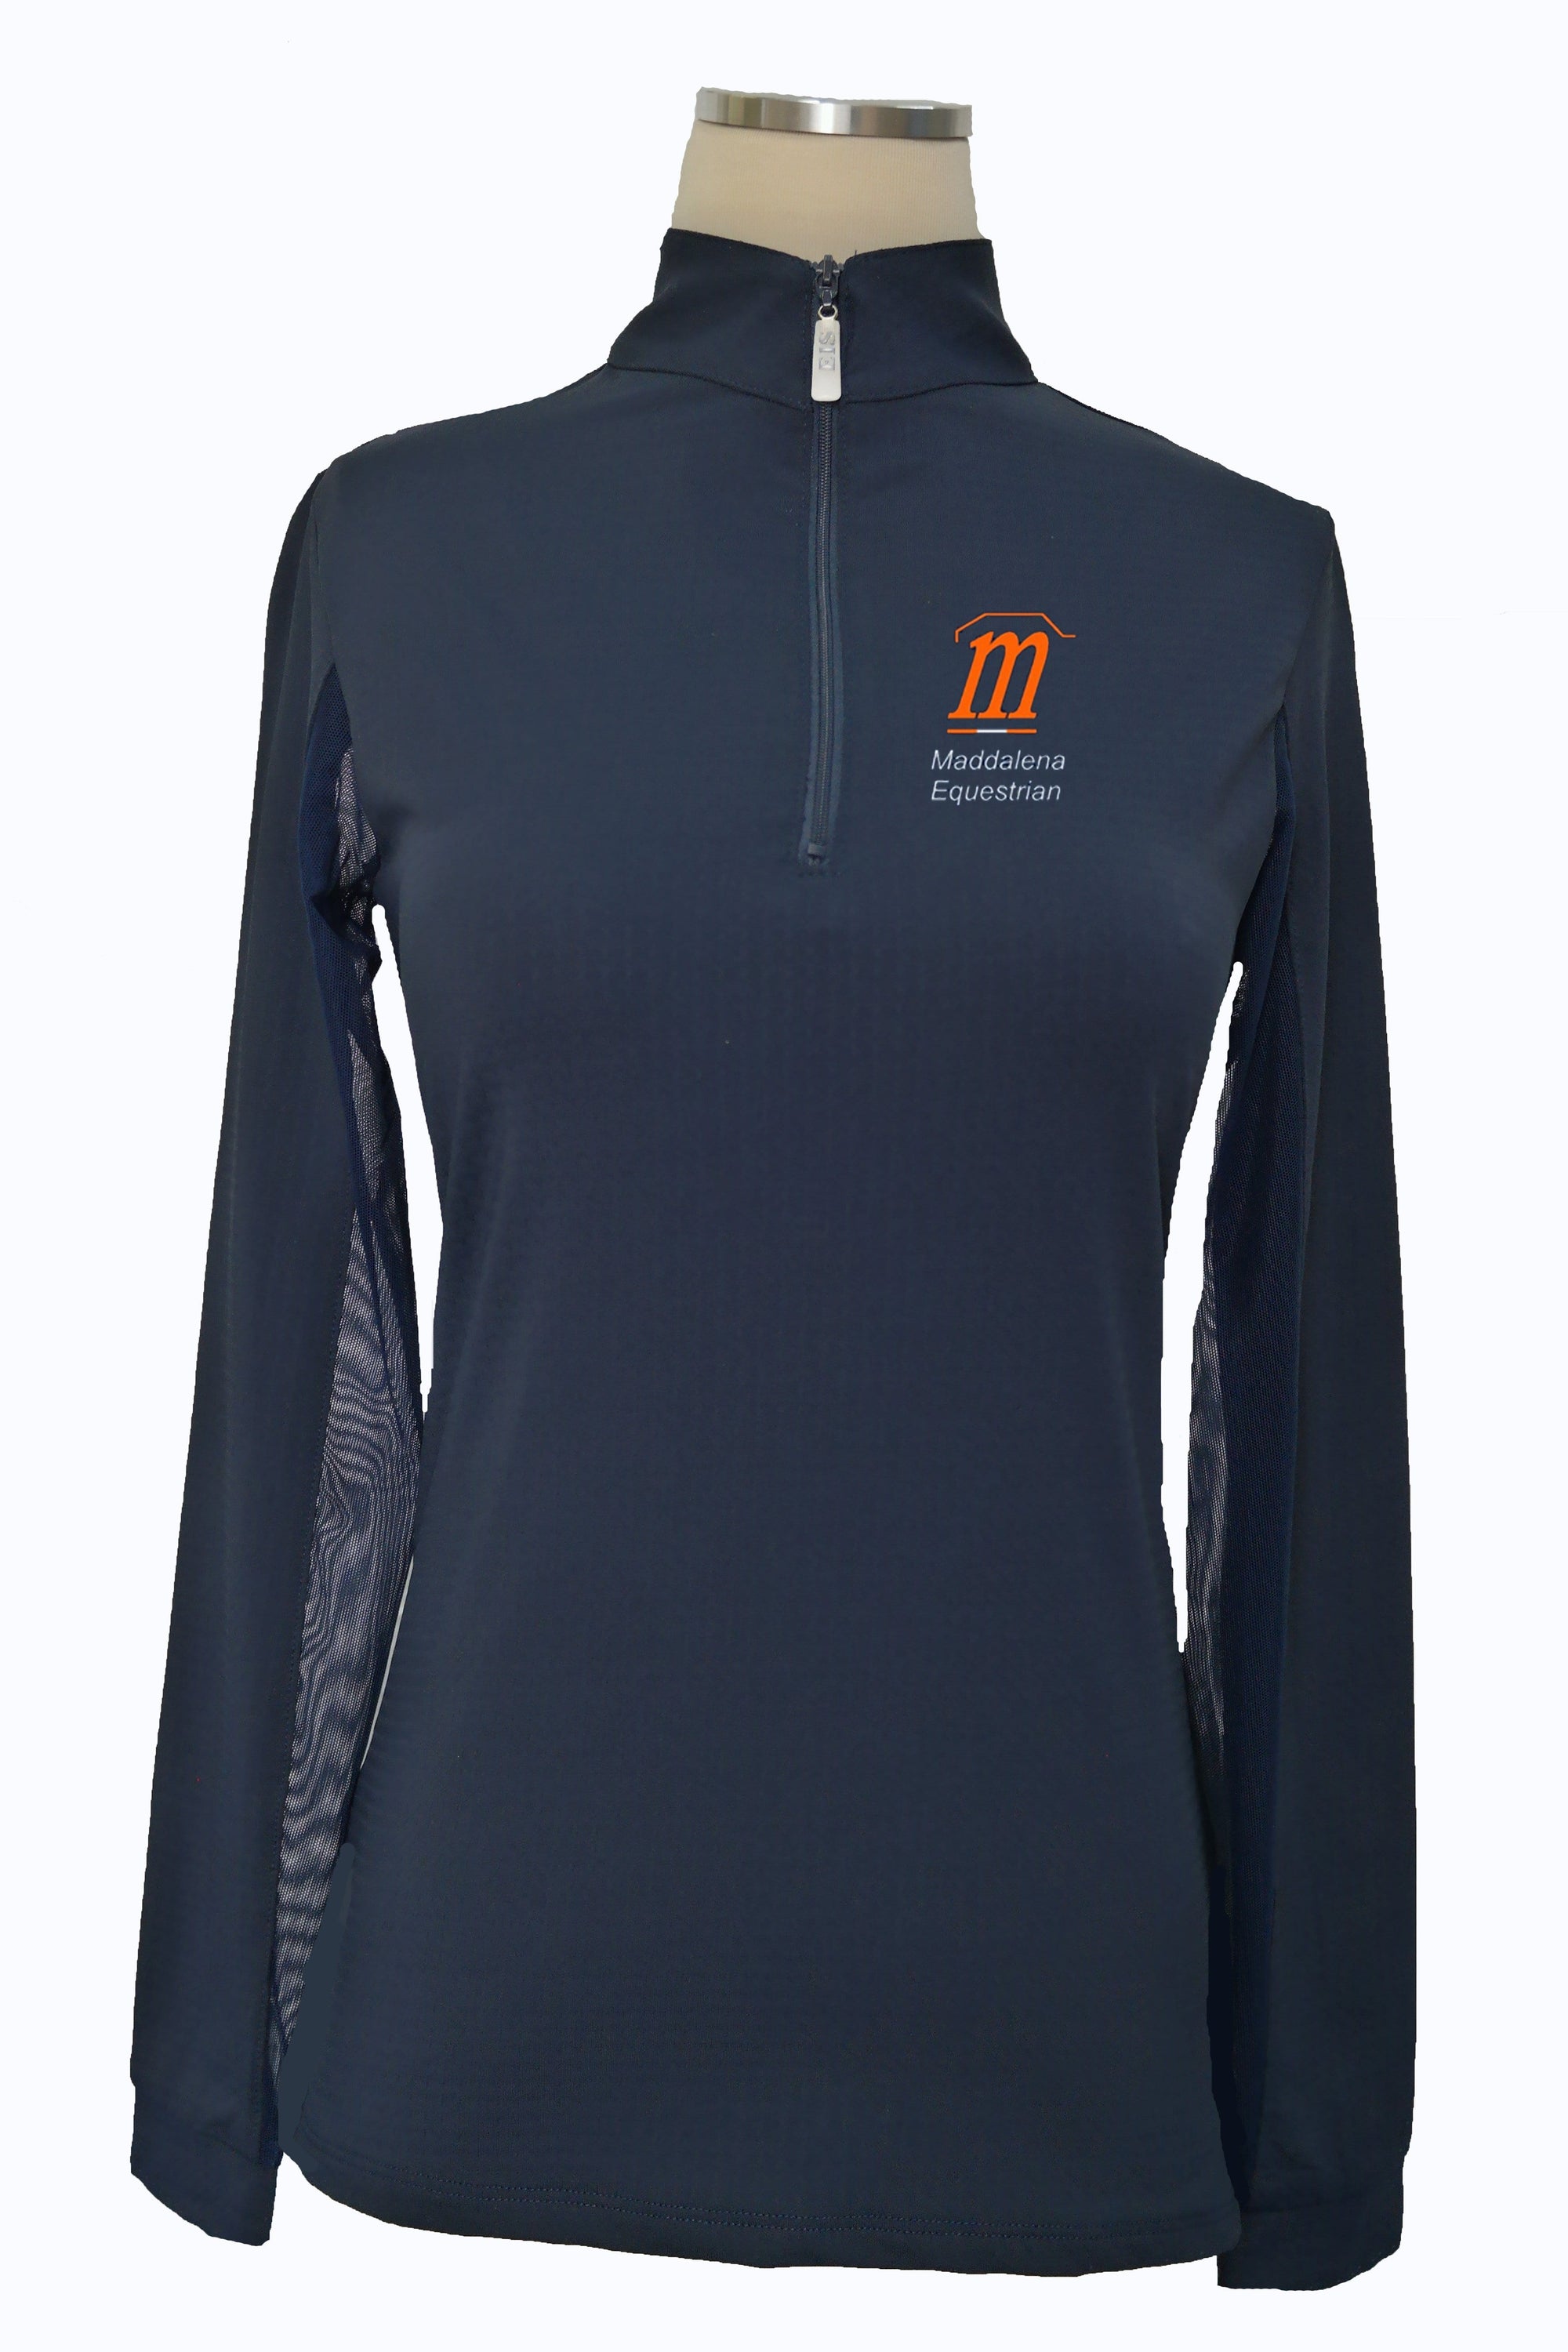 Equestrian Team Apparel Custom Team Shirts Chest and Sleeve / Youth / Solid Navy Maddalena Equestrian Women's Sunshirt equestrian team apparel online tack store mobile tack store custom farm apparel custom show stable clothing equestrian lifestyle horse show clothing riding clothes horses equestrian tack store